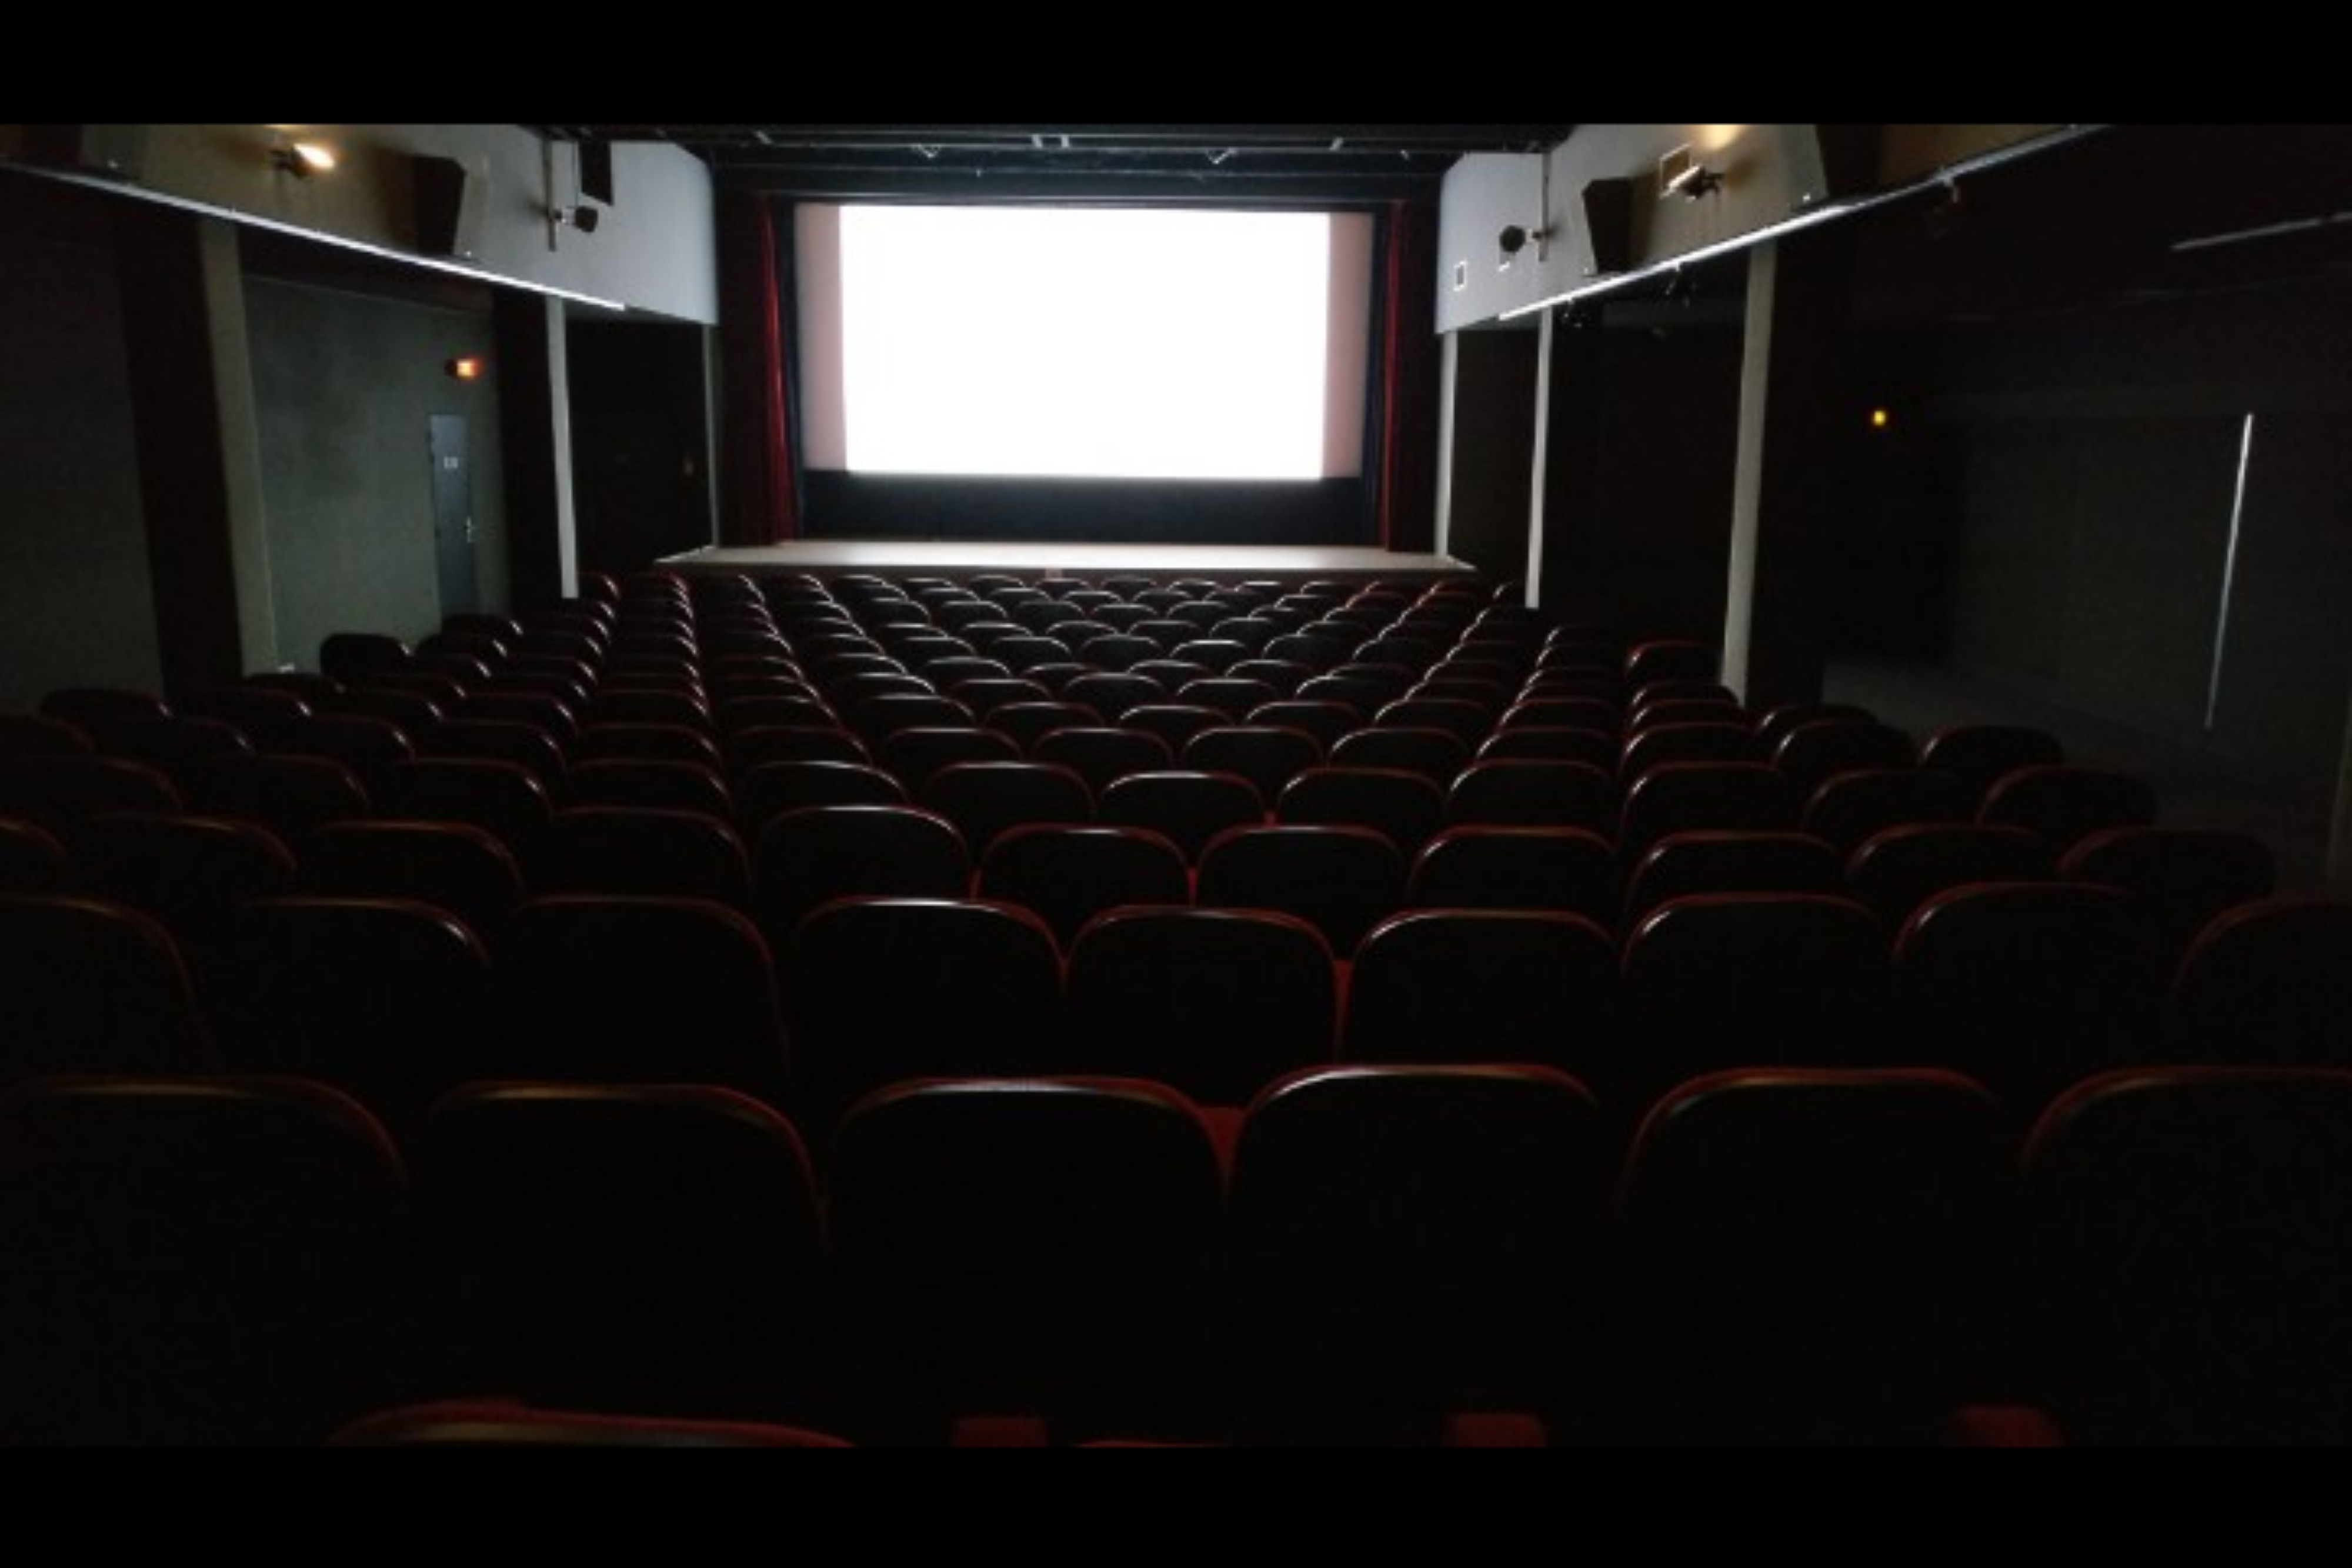 A movie being projected on the big screen of a theatre full of red empty seats.